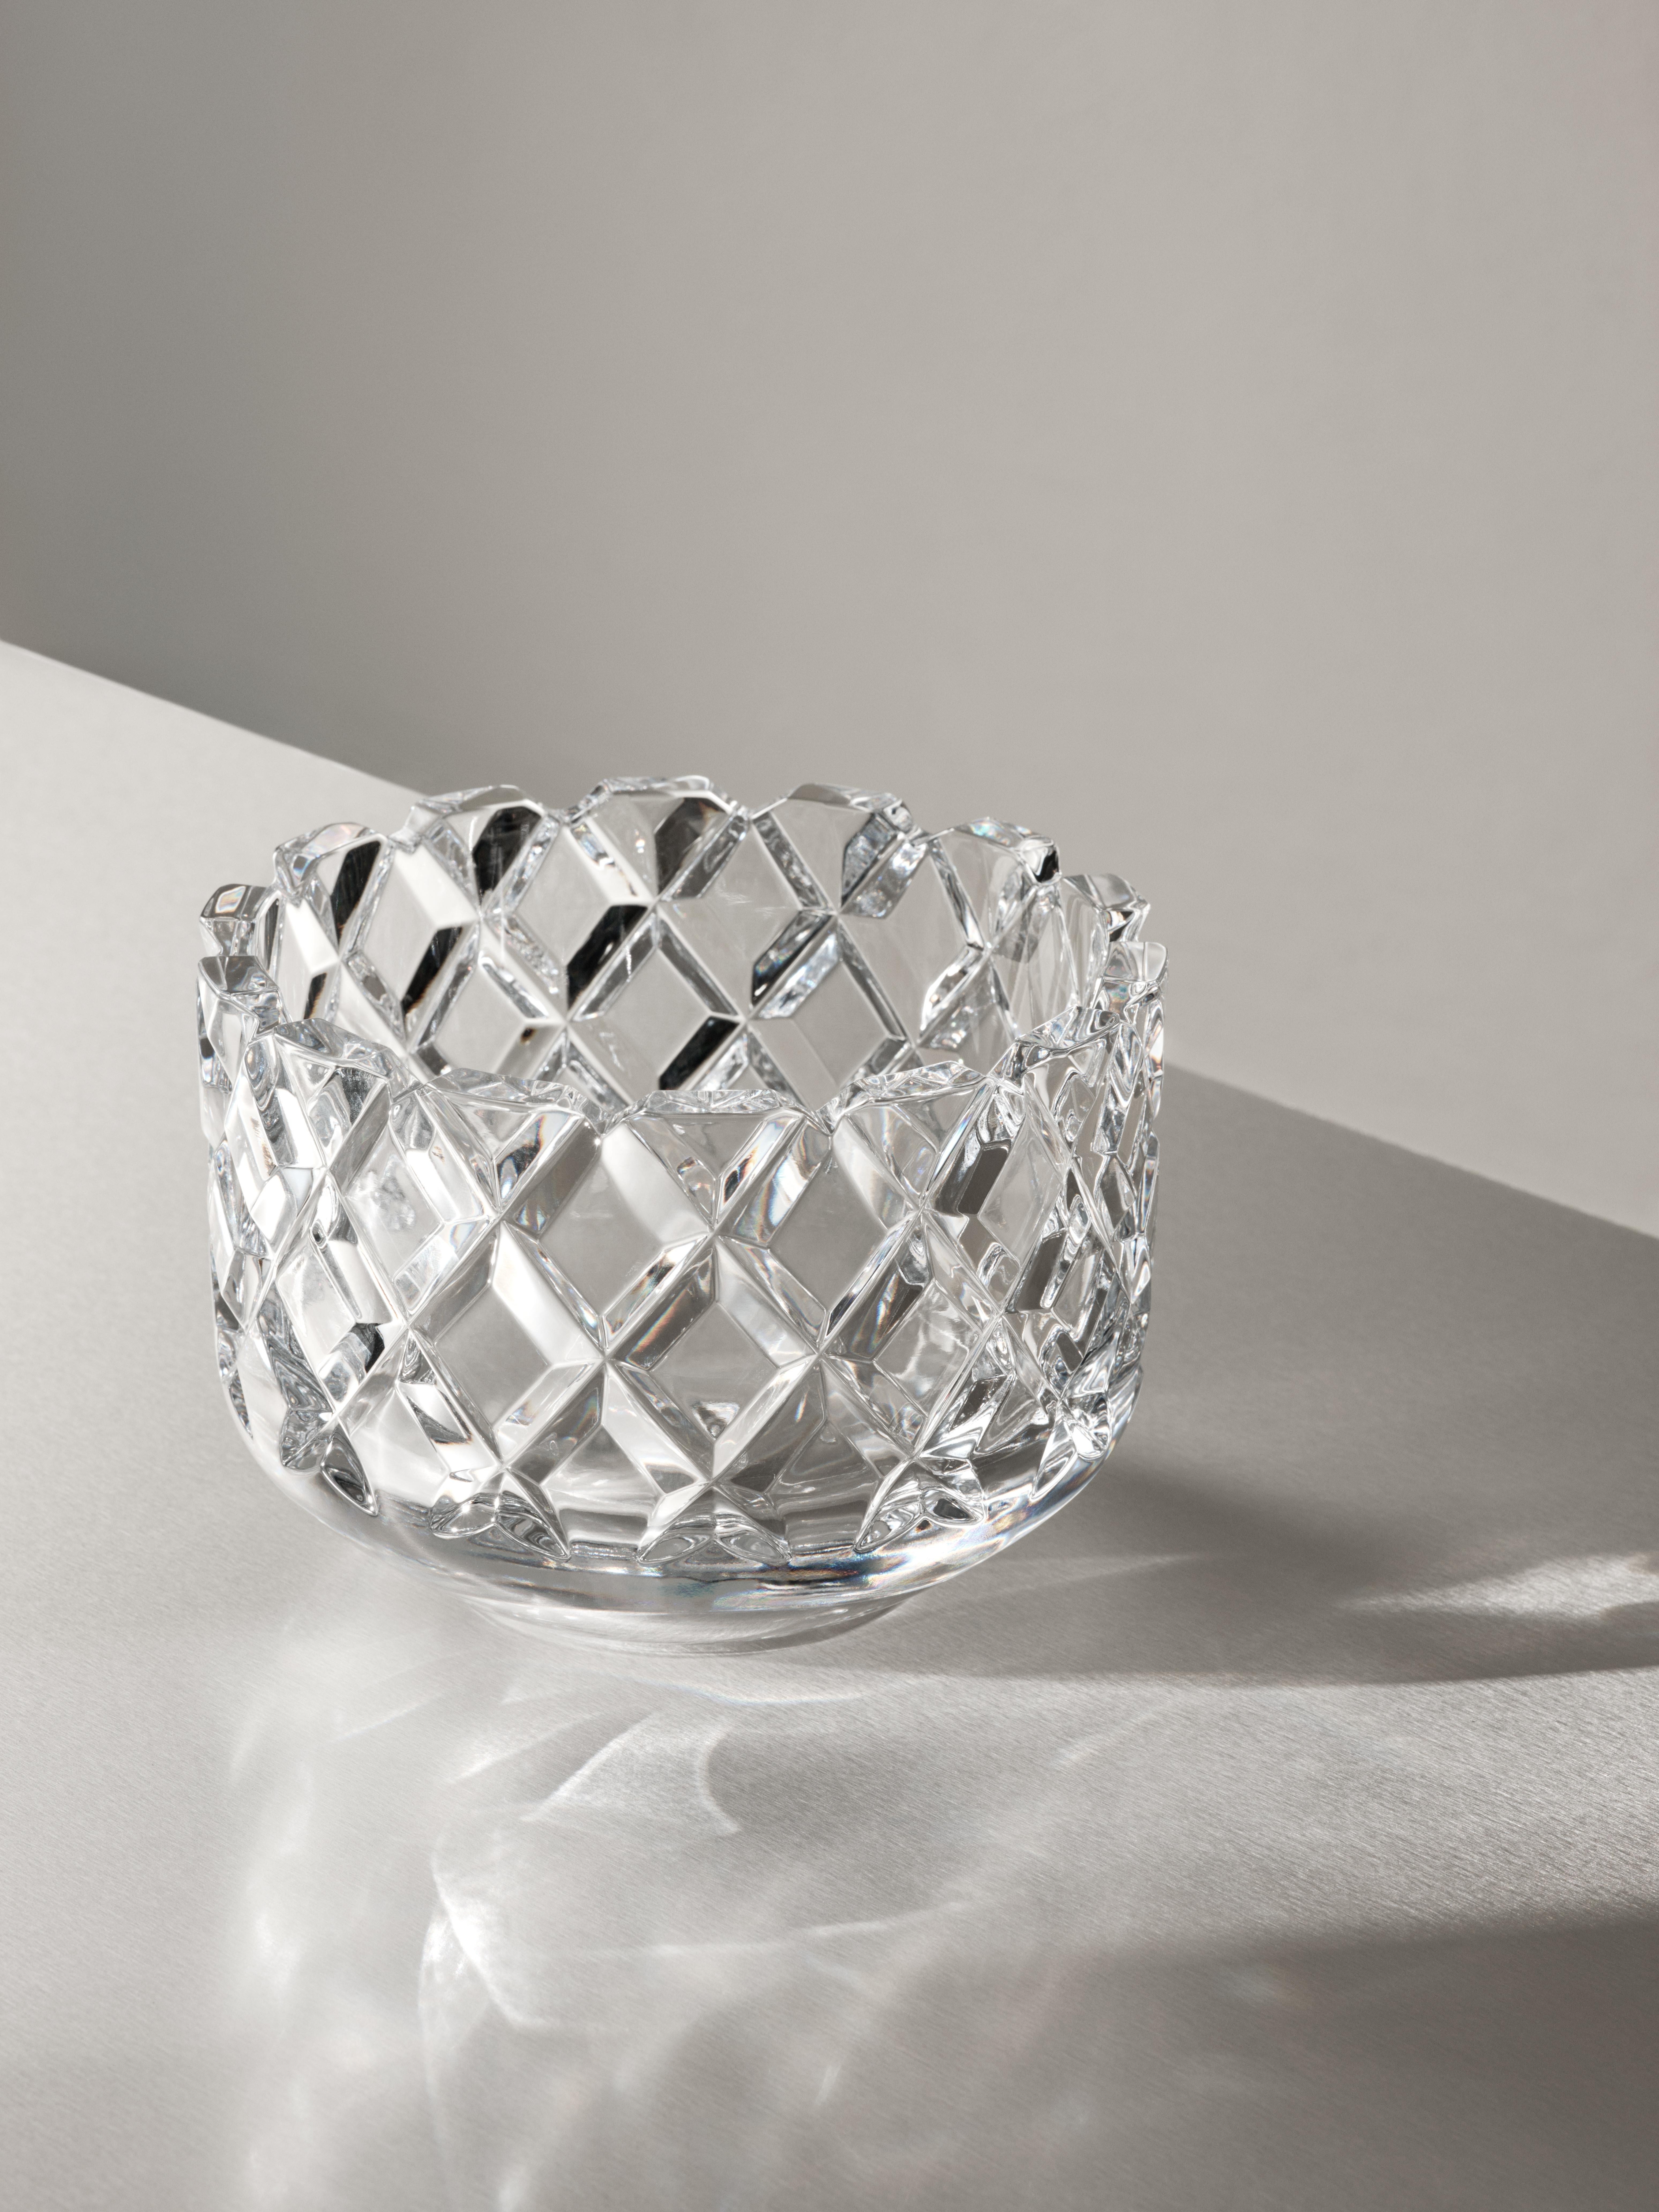 The medium bowl in the Sofiero collection, designed by Gunnar Cyrén in 1960, is a timeless Scandinavian classic from Orrefors. It has a deep-cut motif, which beautifully refracts light in the thick crystal. Sofiero Bowl is both decorative and